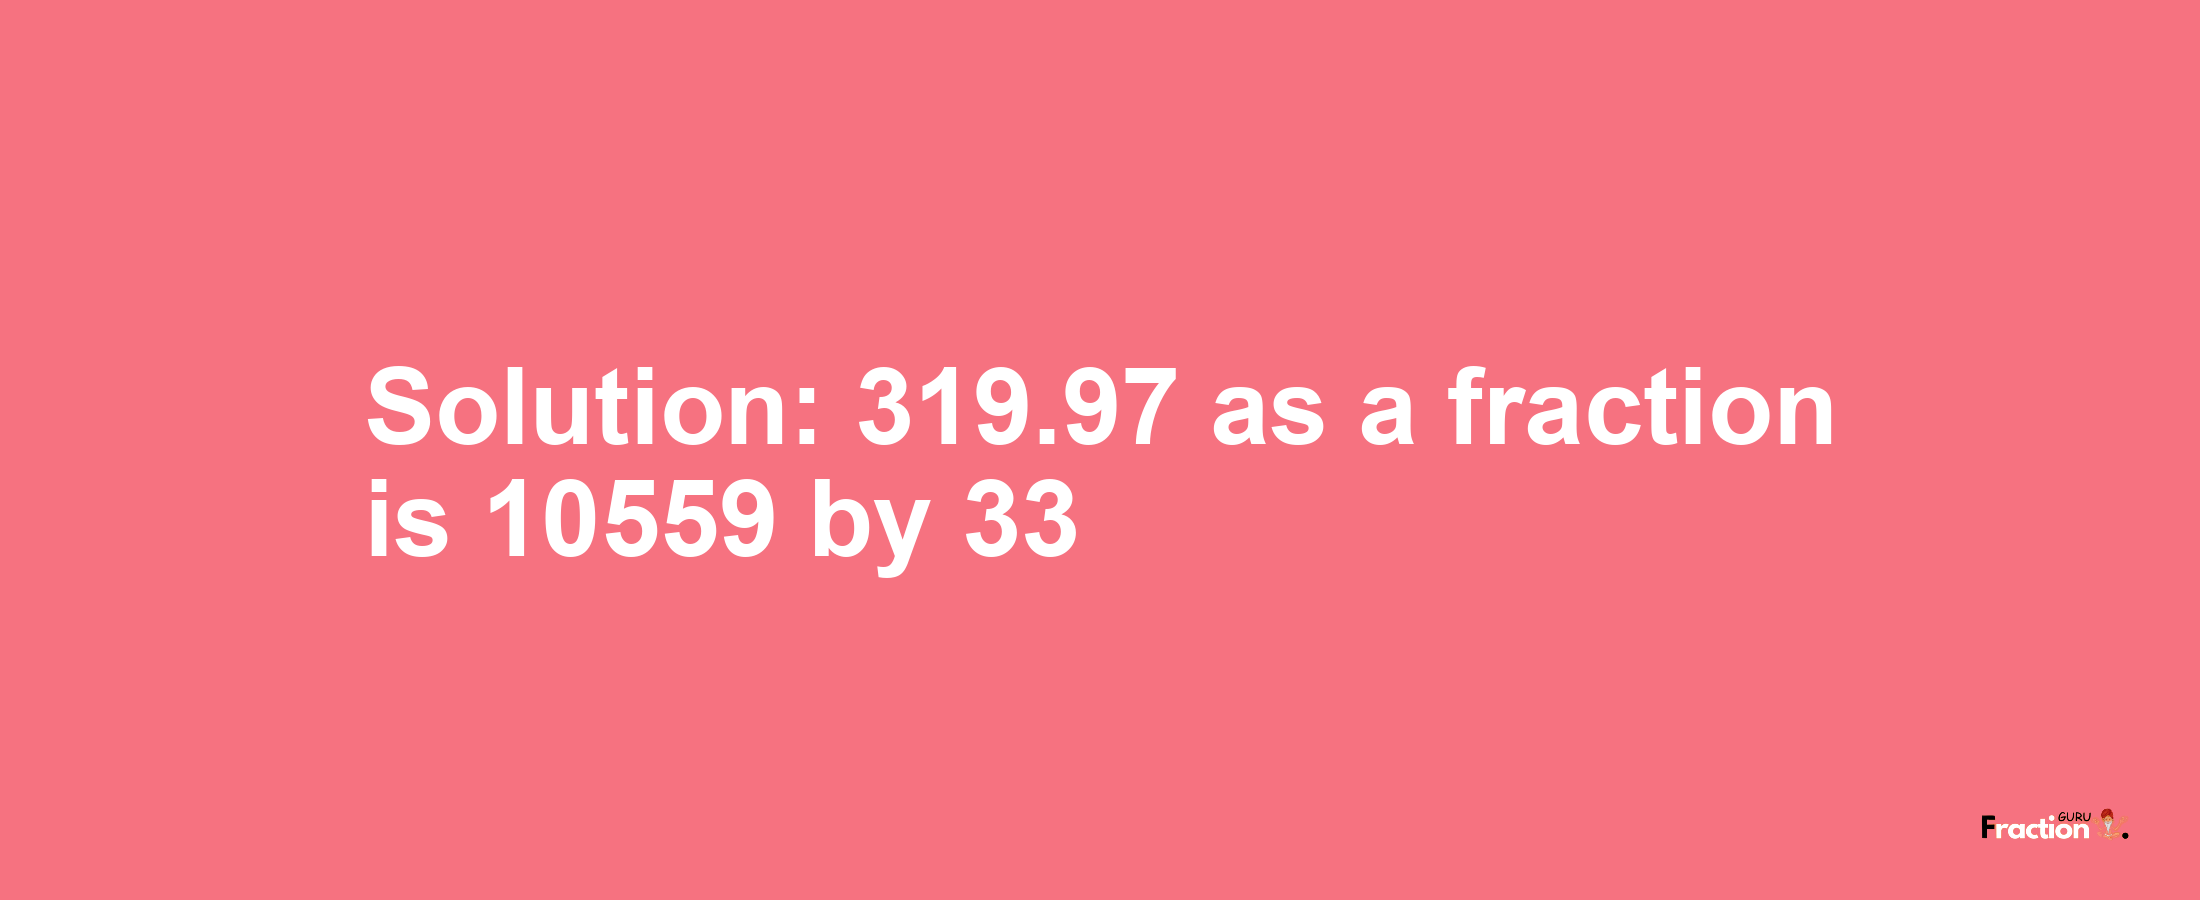 Solution:319.97 as a fraction is 10559/33